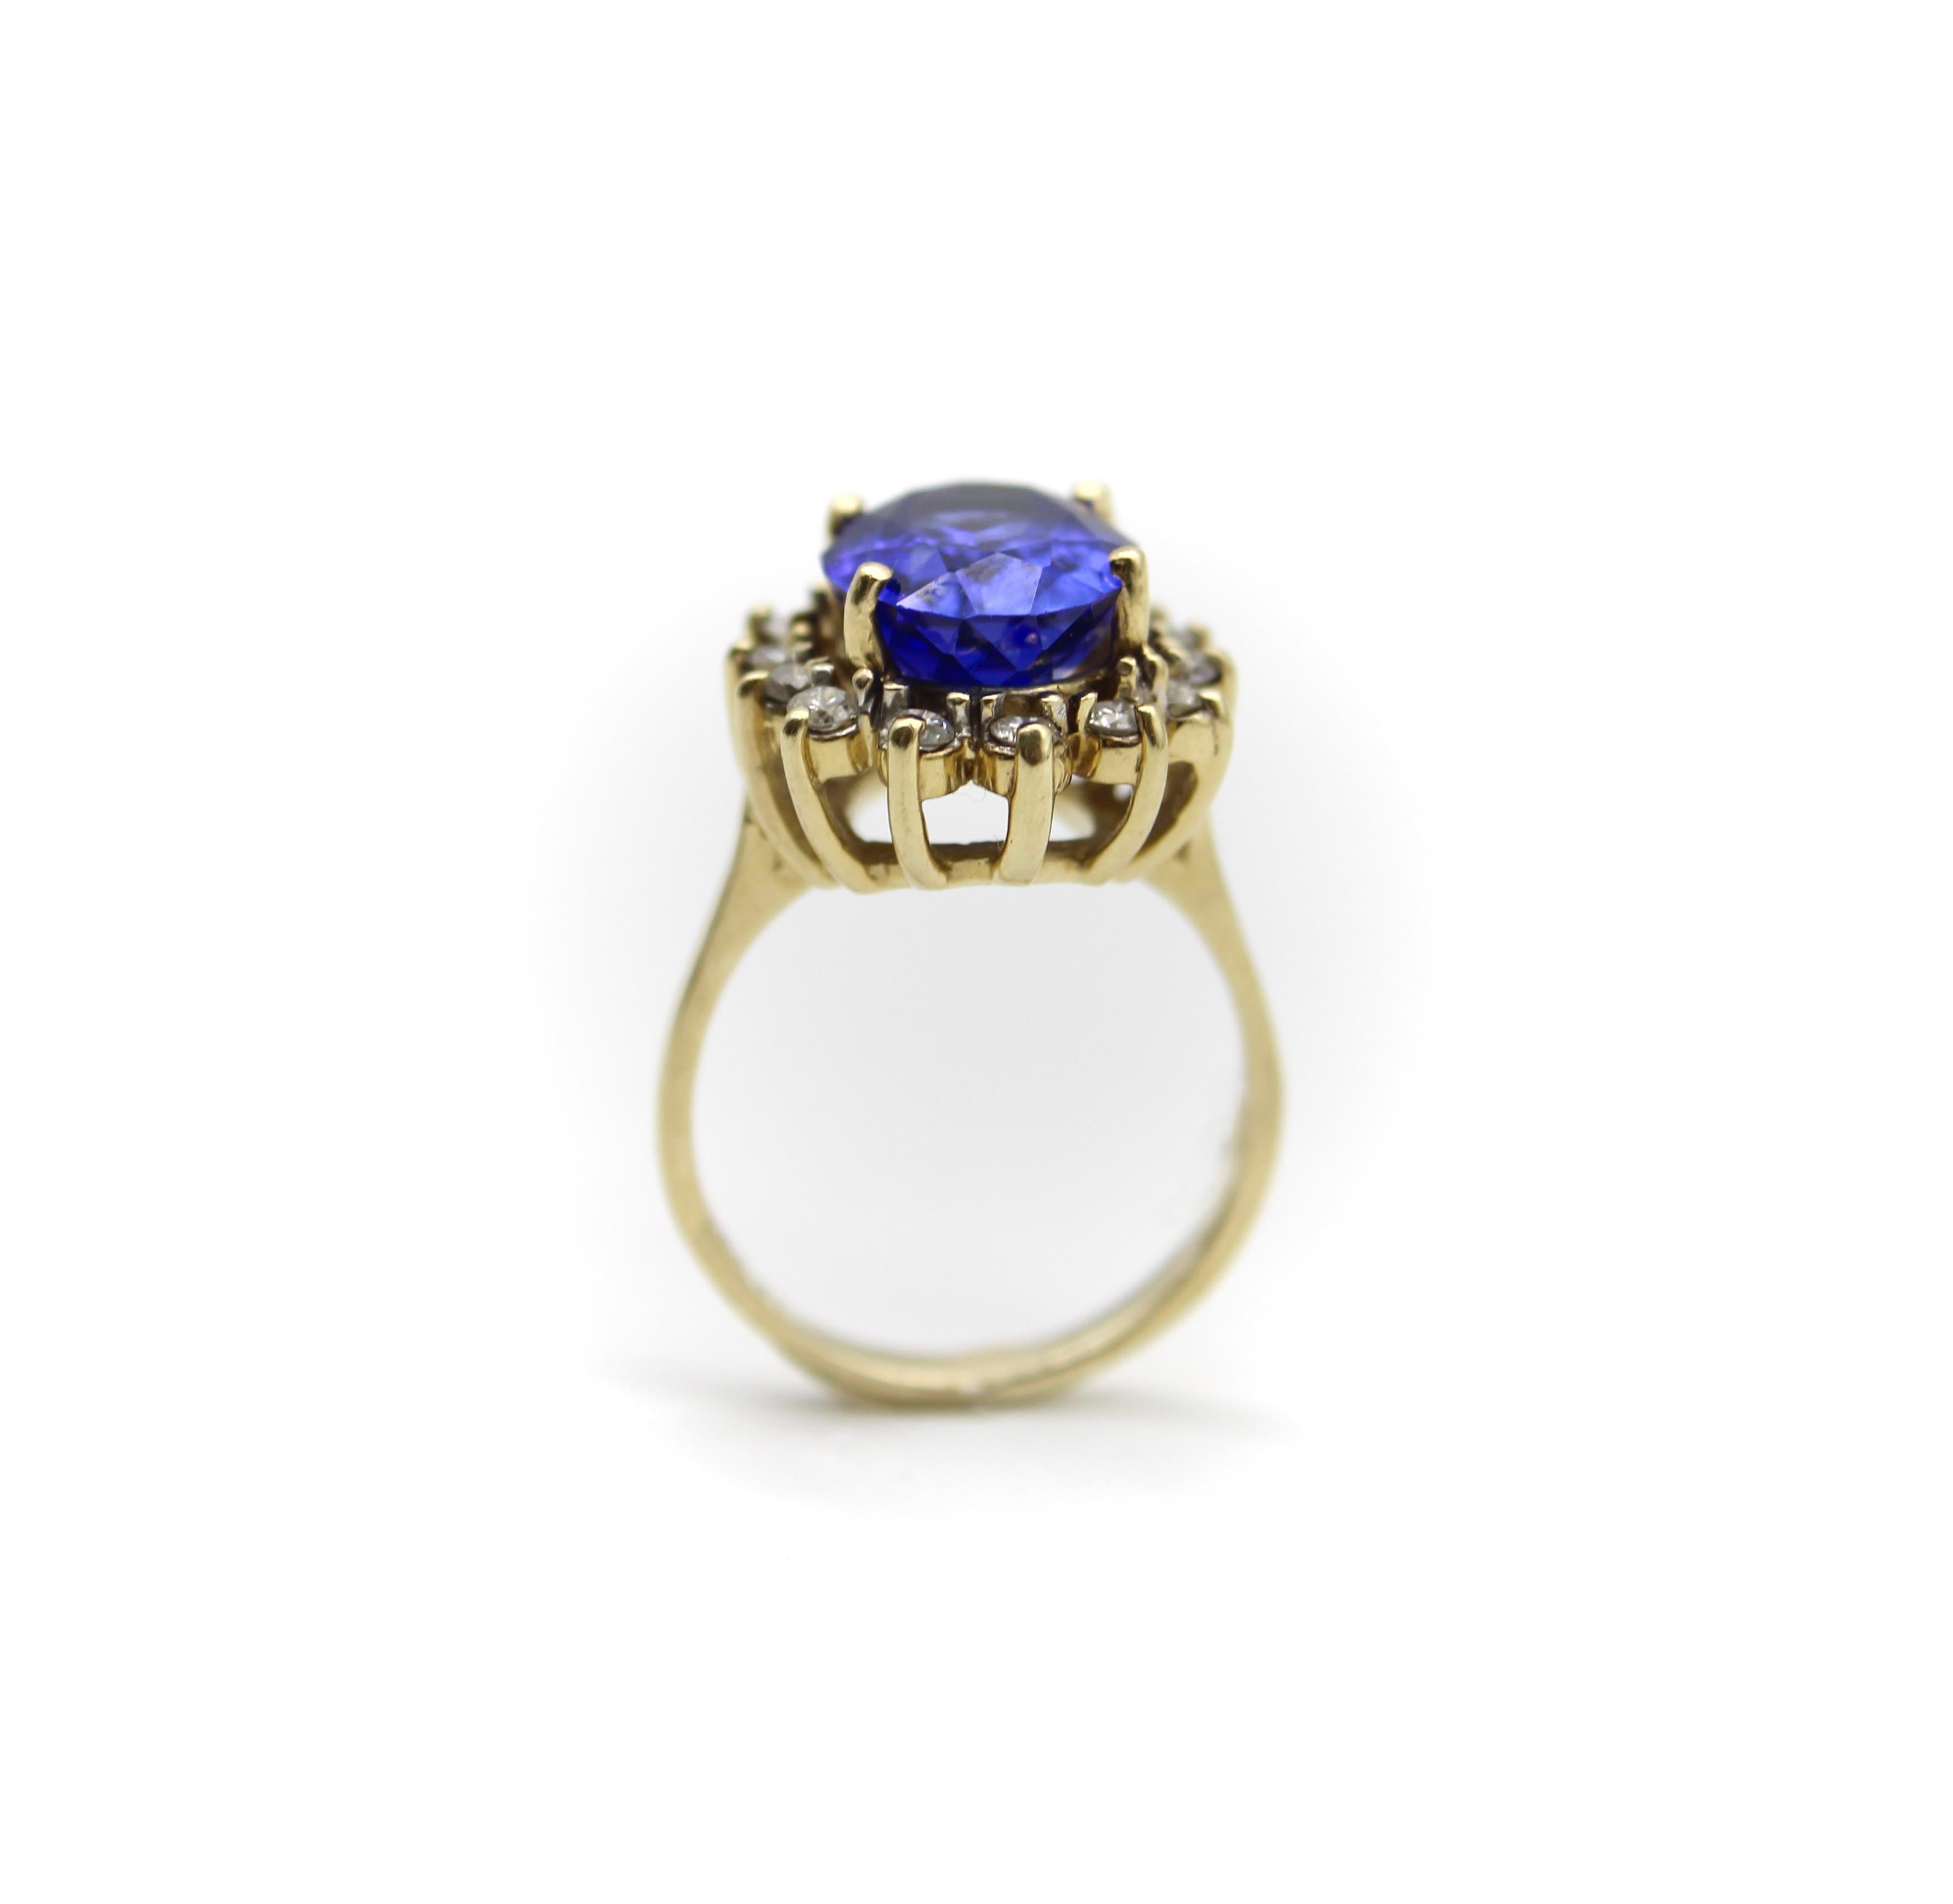 Vintage 14K Gold 7 Carat Tanzanite and Diamond Halo Ring by LeVian In Good Condition For Sale In Venice, CA